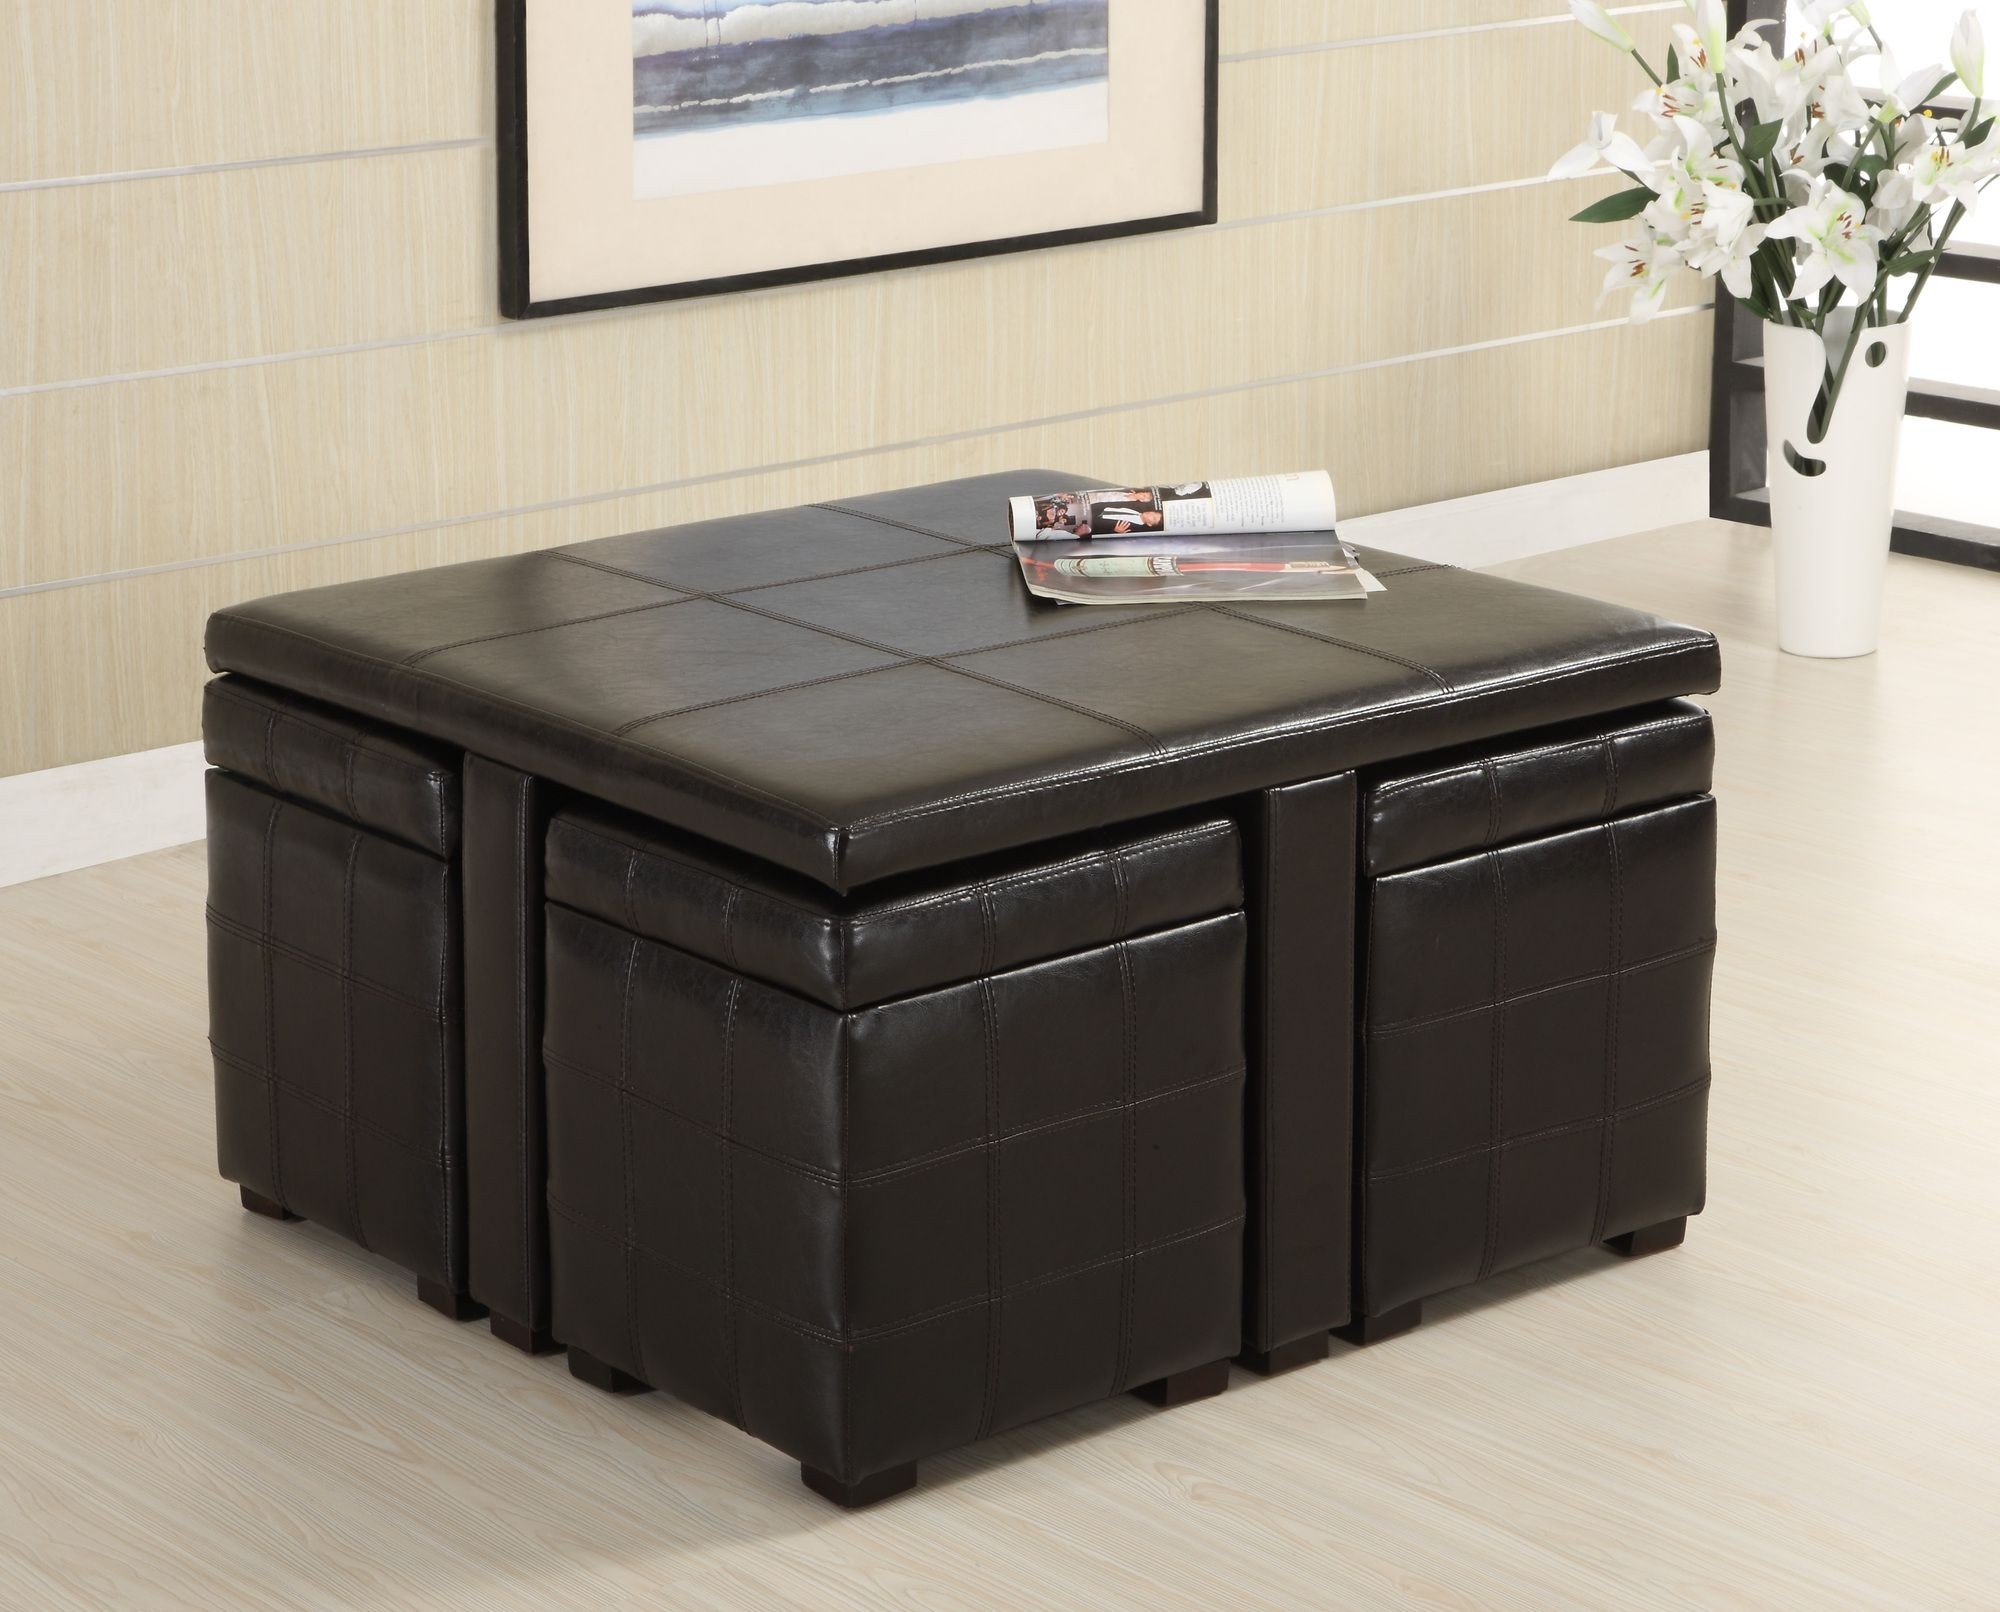 Ceres leatherette 5 piece coffee table and ottoman set in